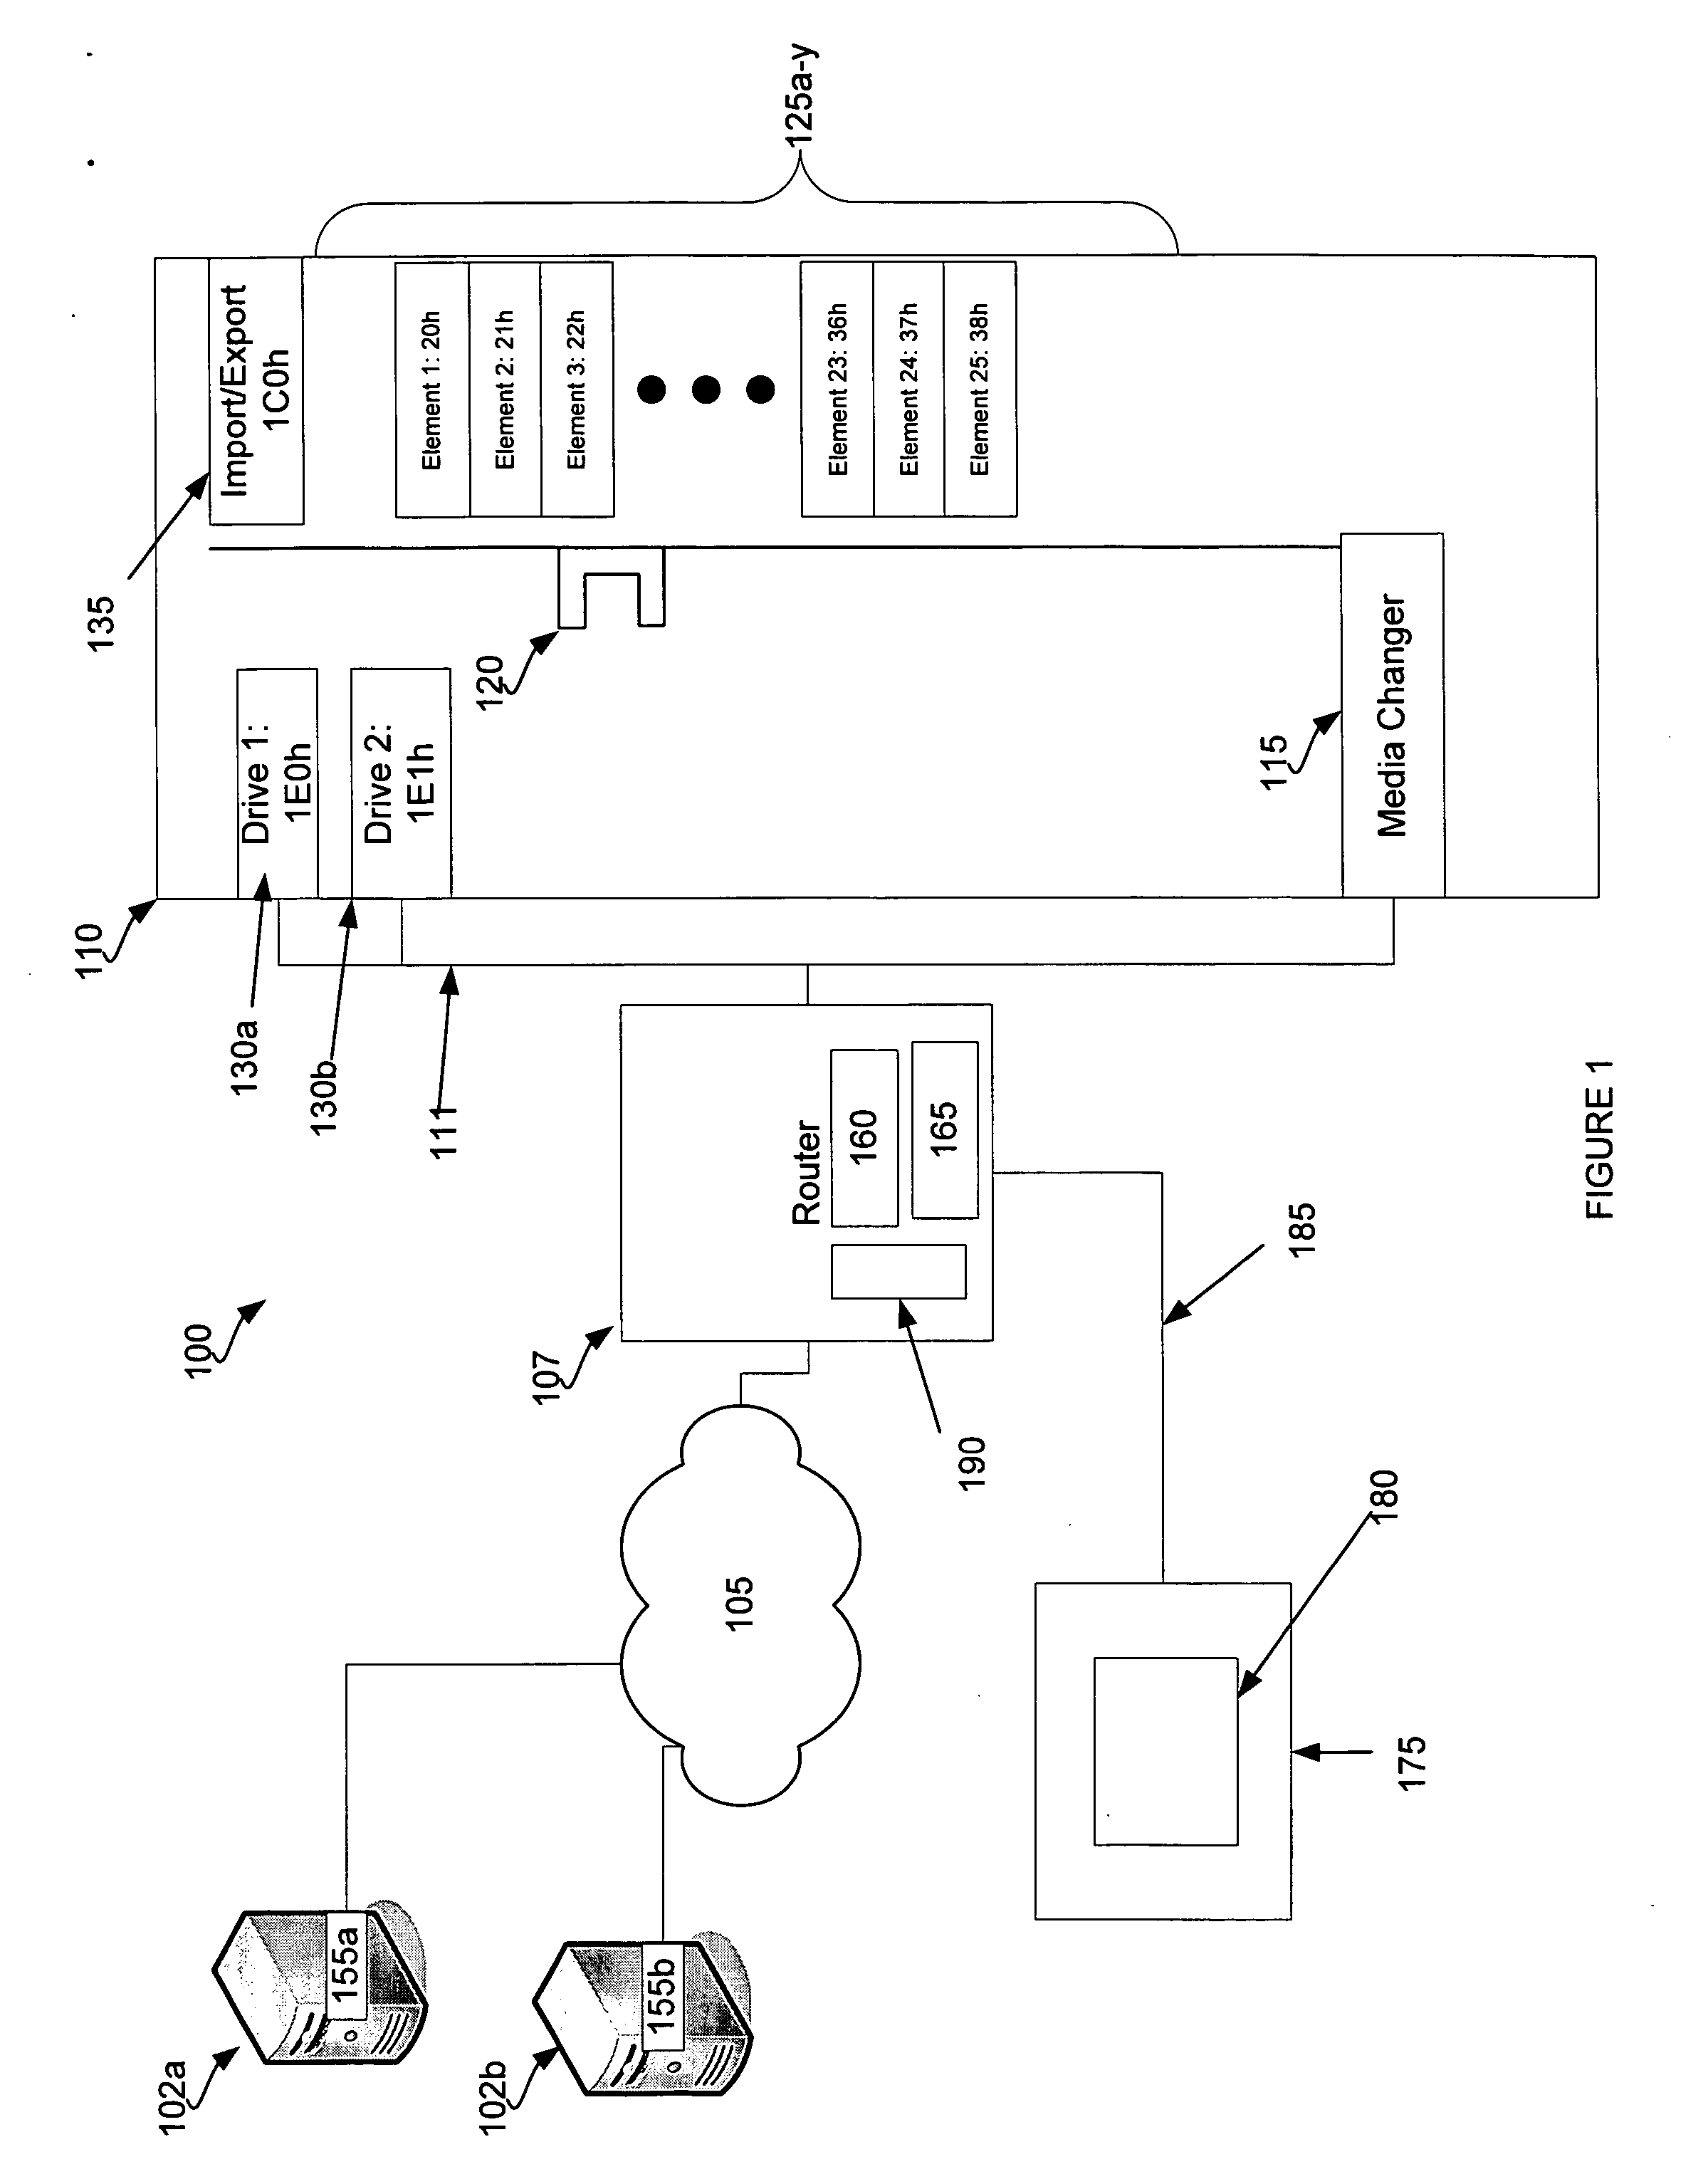 System and method for mode select handling for a partitioned media library